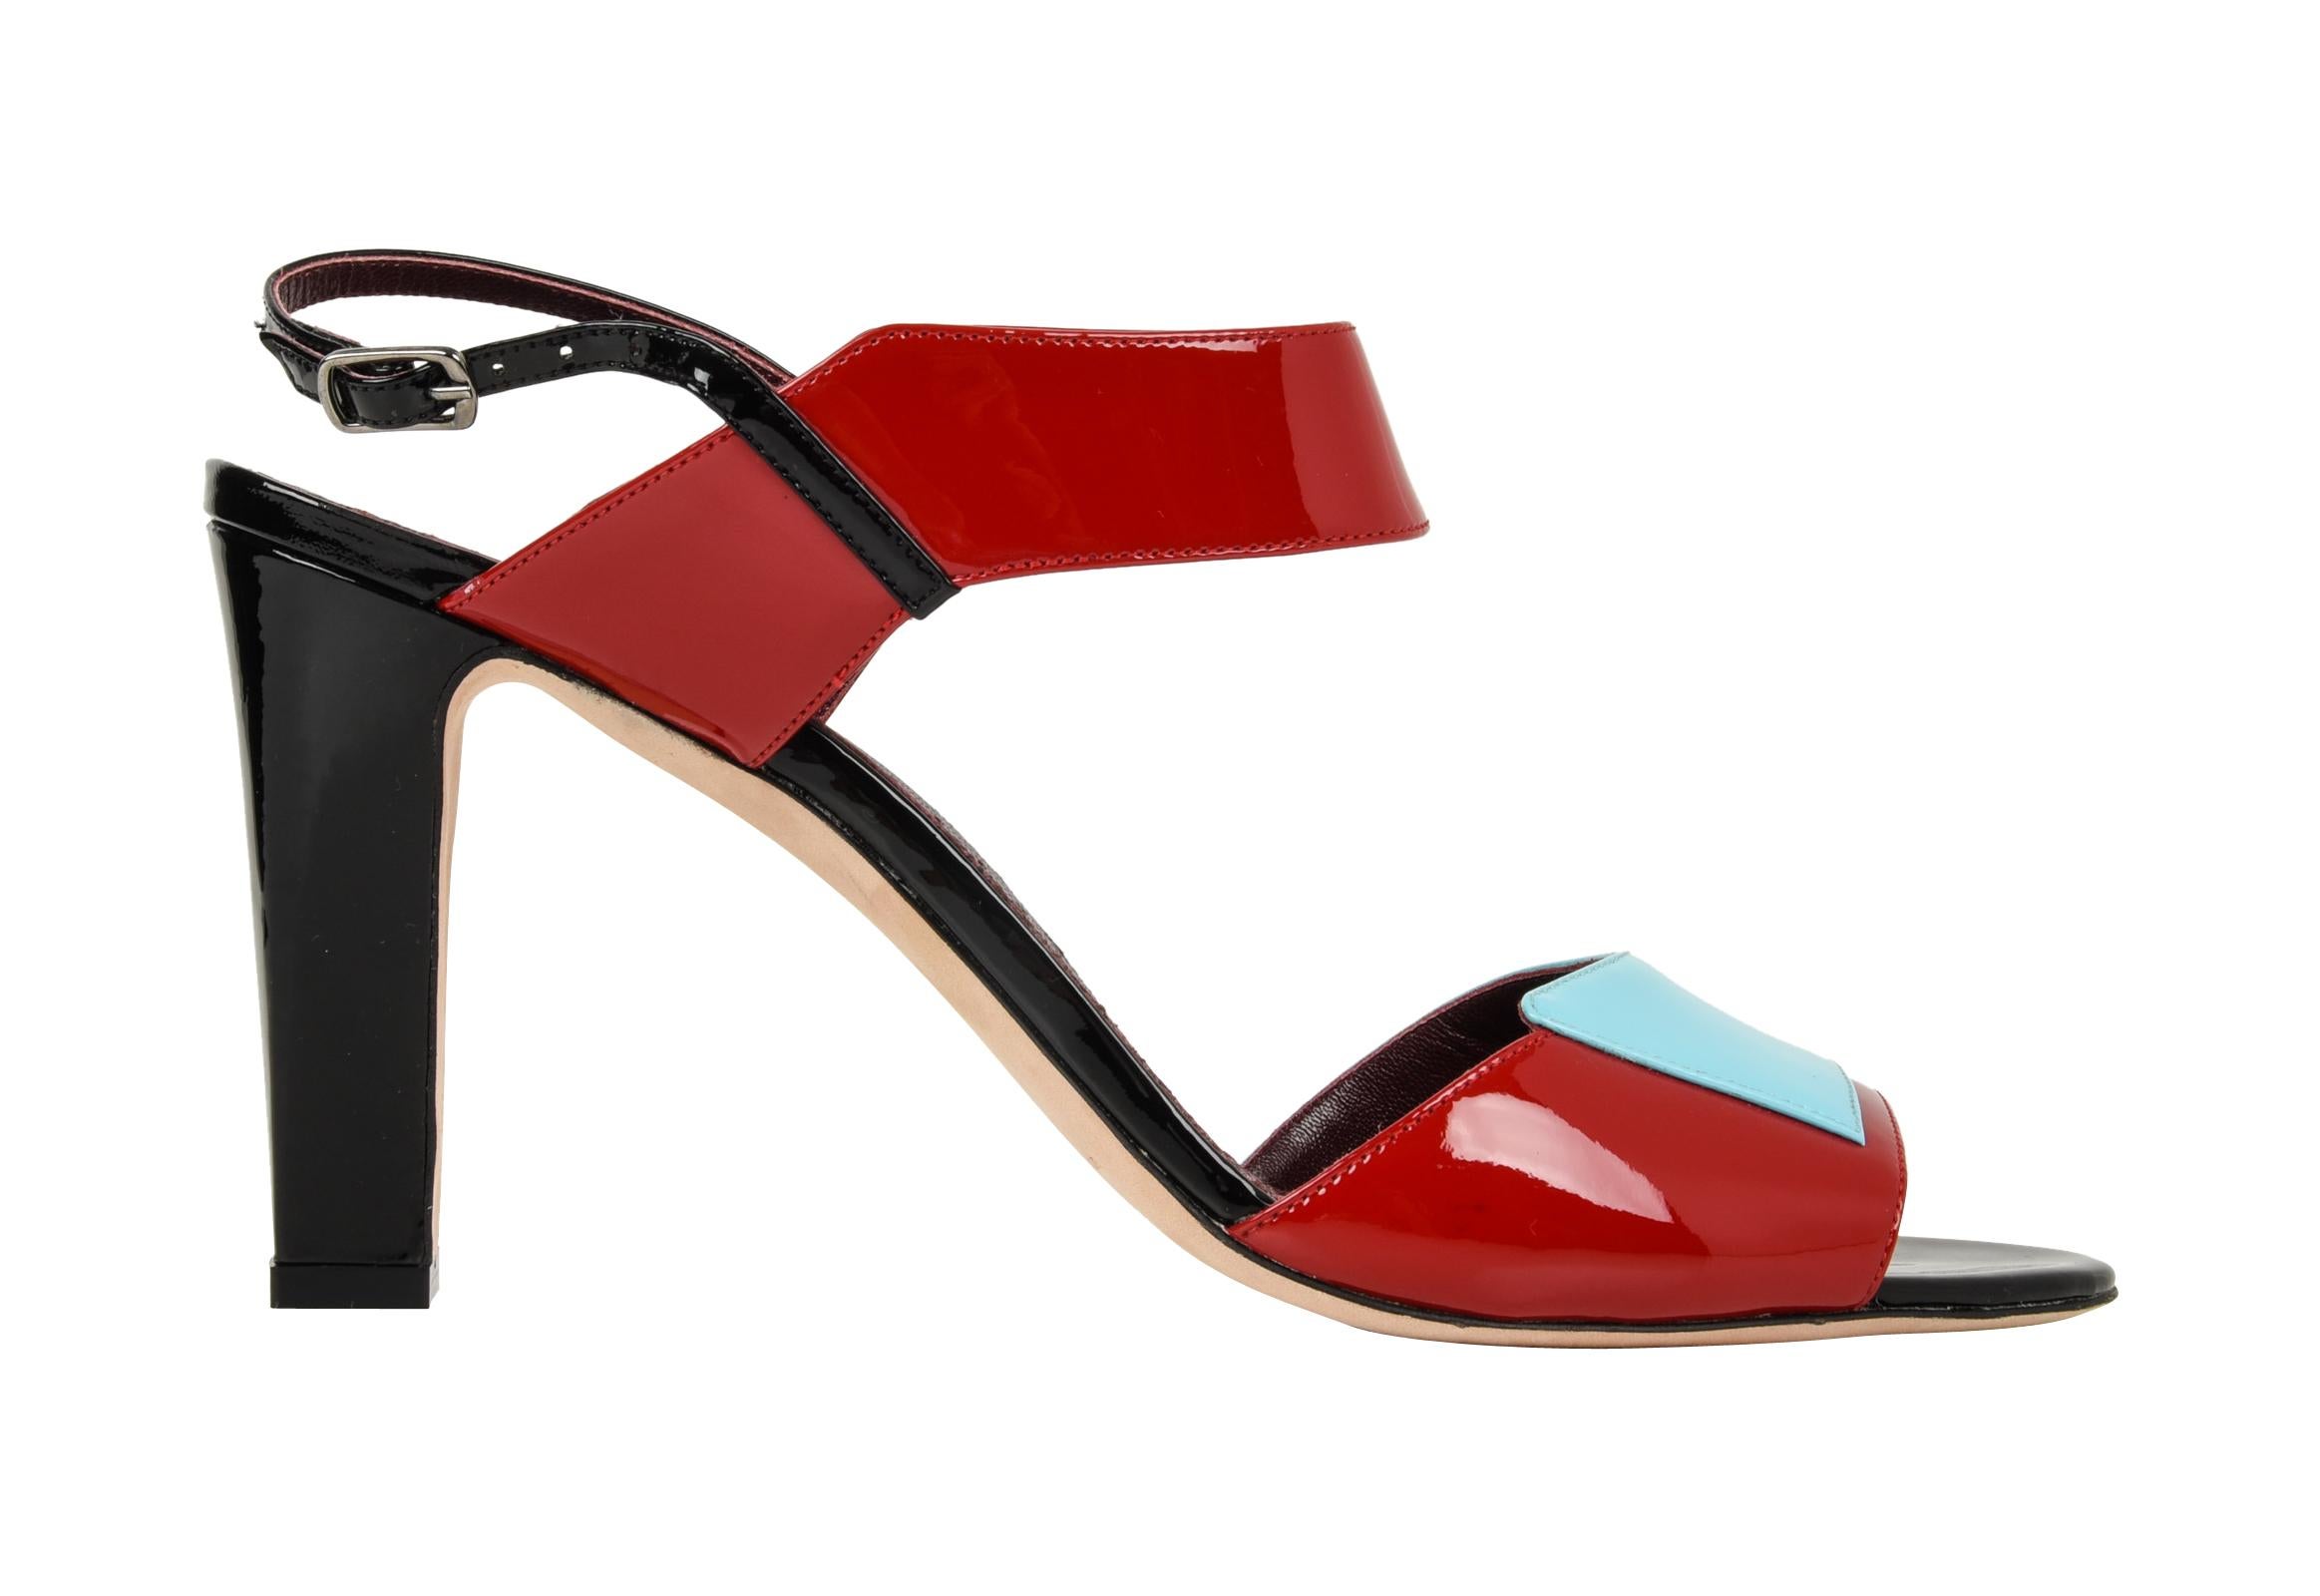 Guaranteed  authentic Manolo Blahnik striking patent leather summer sandal. 
Tomato red, light blue and black combined with the architectural details makes you think Deco!
Modified block heel for all day comfort.
NEW or NEVER WORN
Comes with